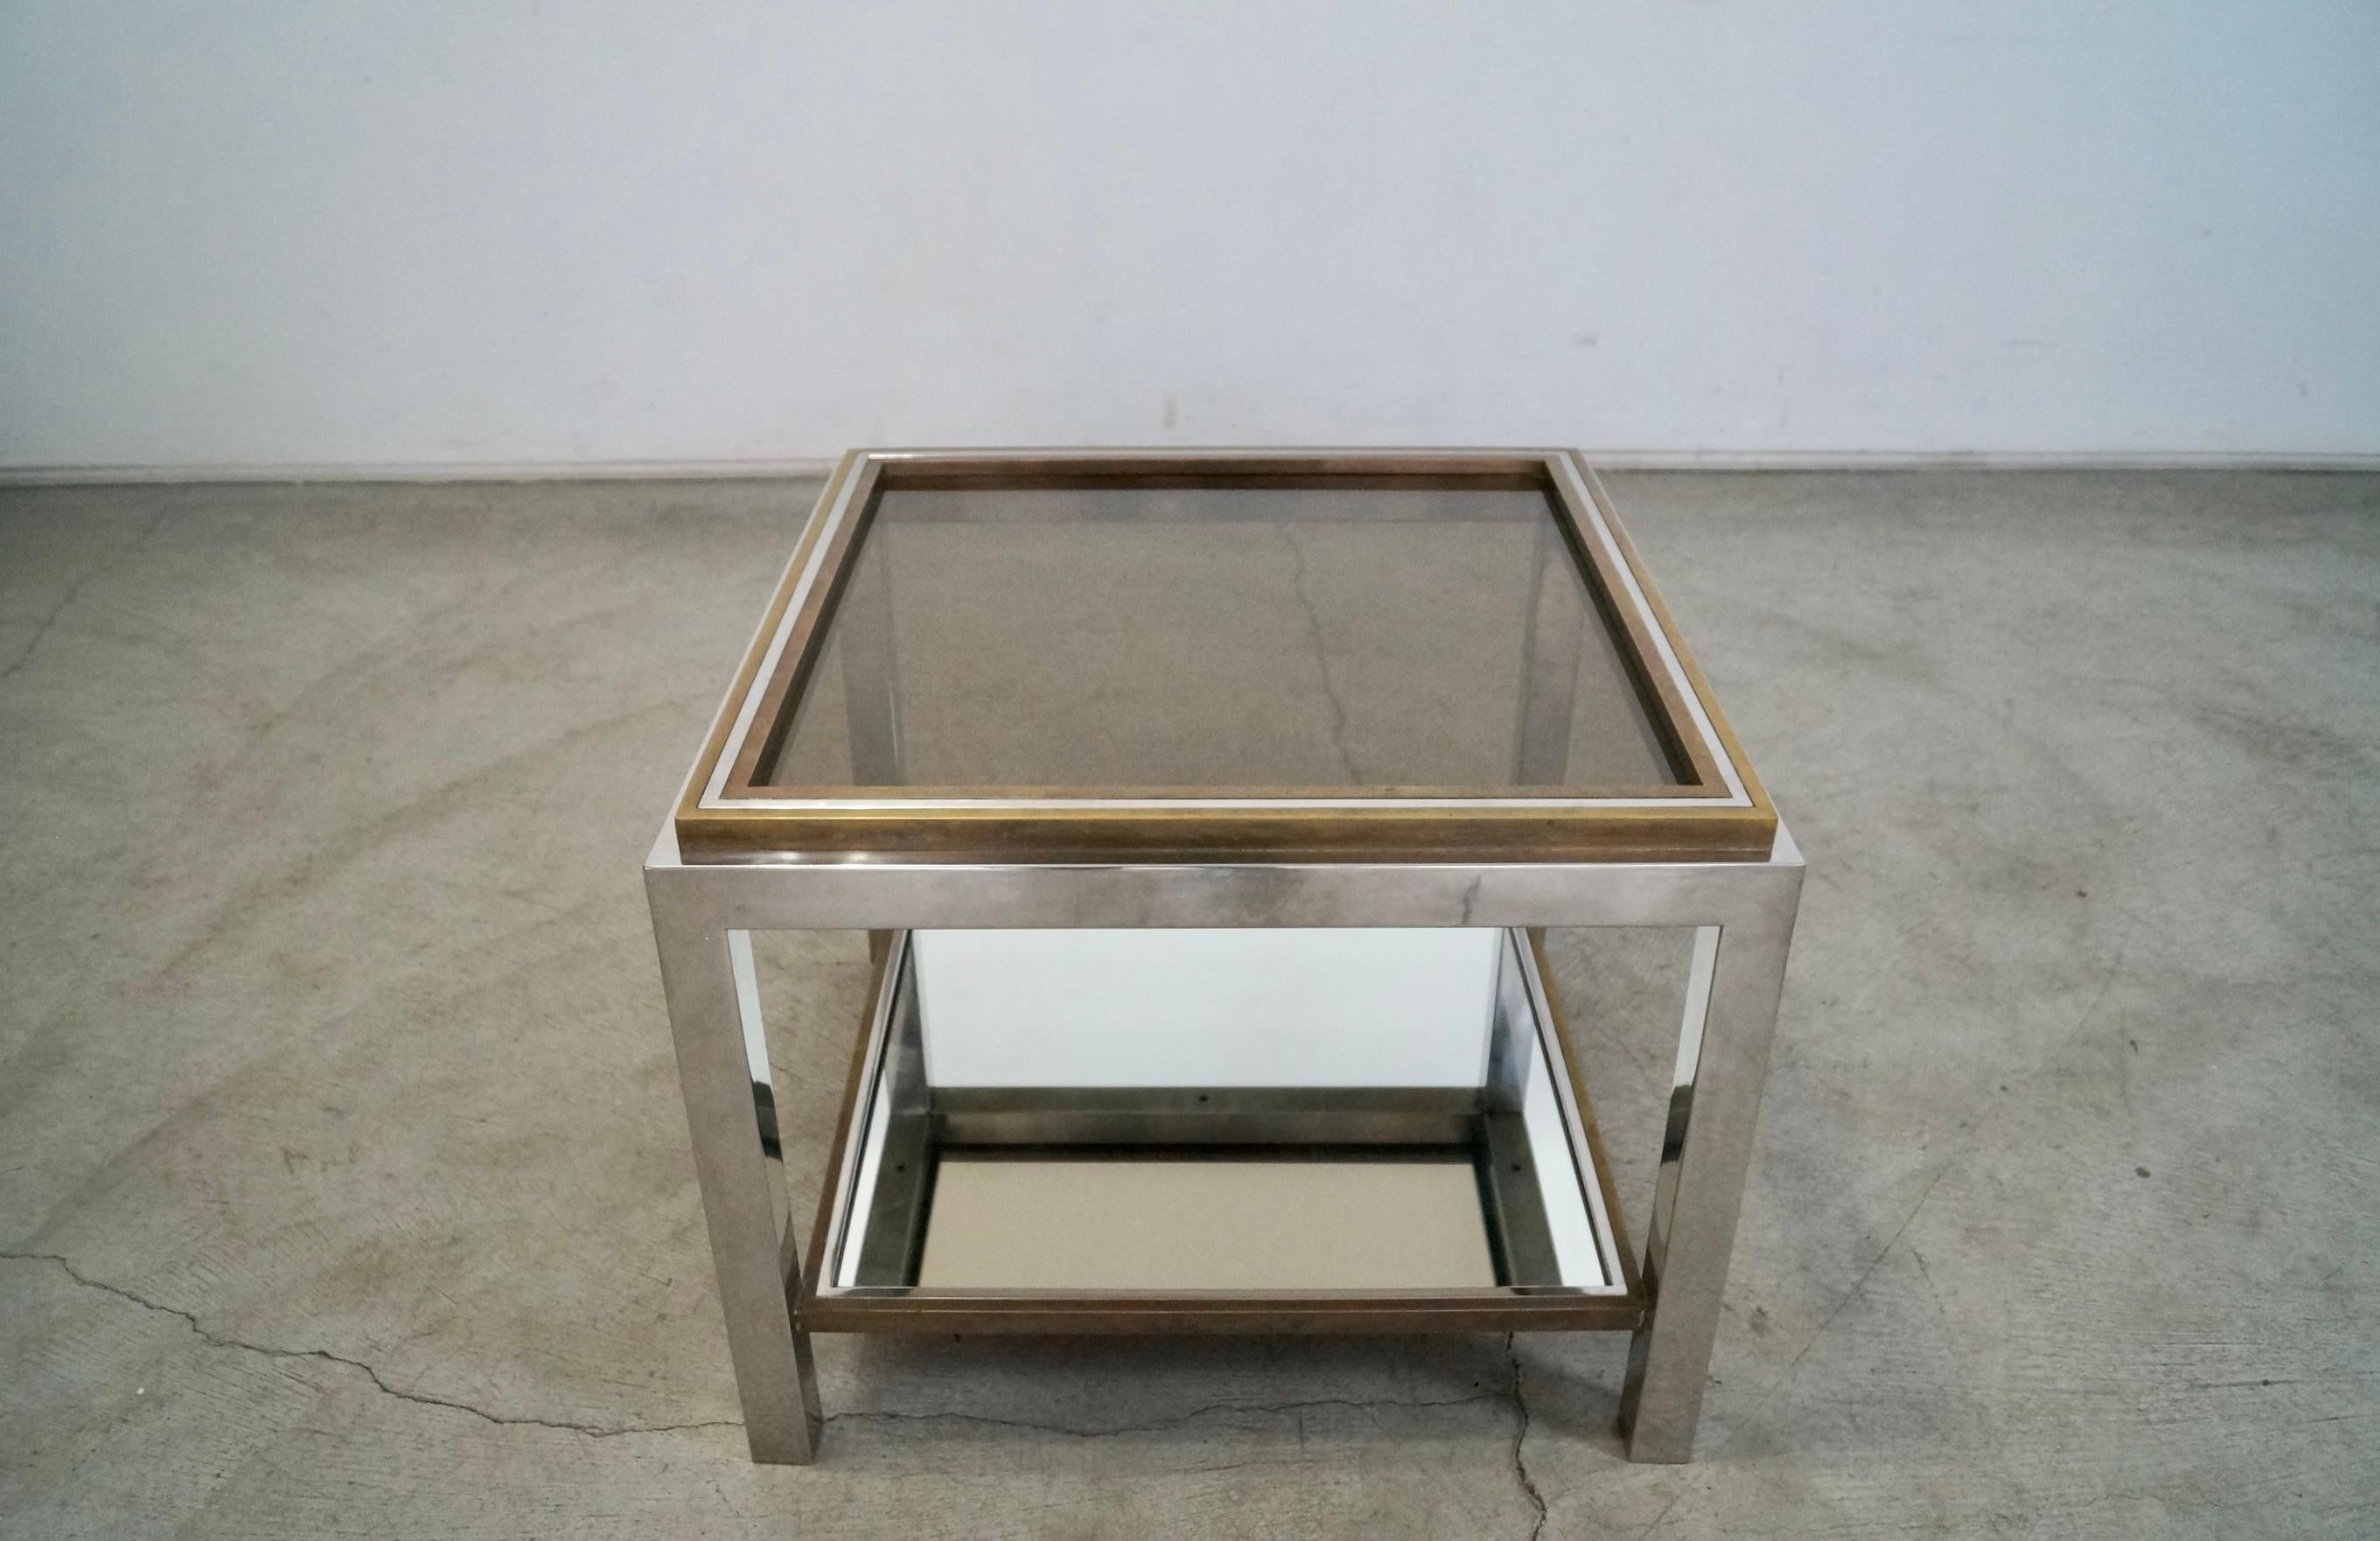 Vintage 1970's Midcentury Modern end table for sale. Has a chrome frame with brass trims on the top and bottom shelf. The bottom has a mirror glass insert and the top has a smoked dark glass. This is an original Jean Charles table, and is in the